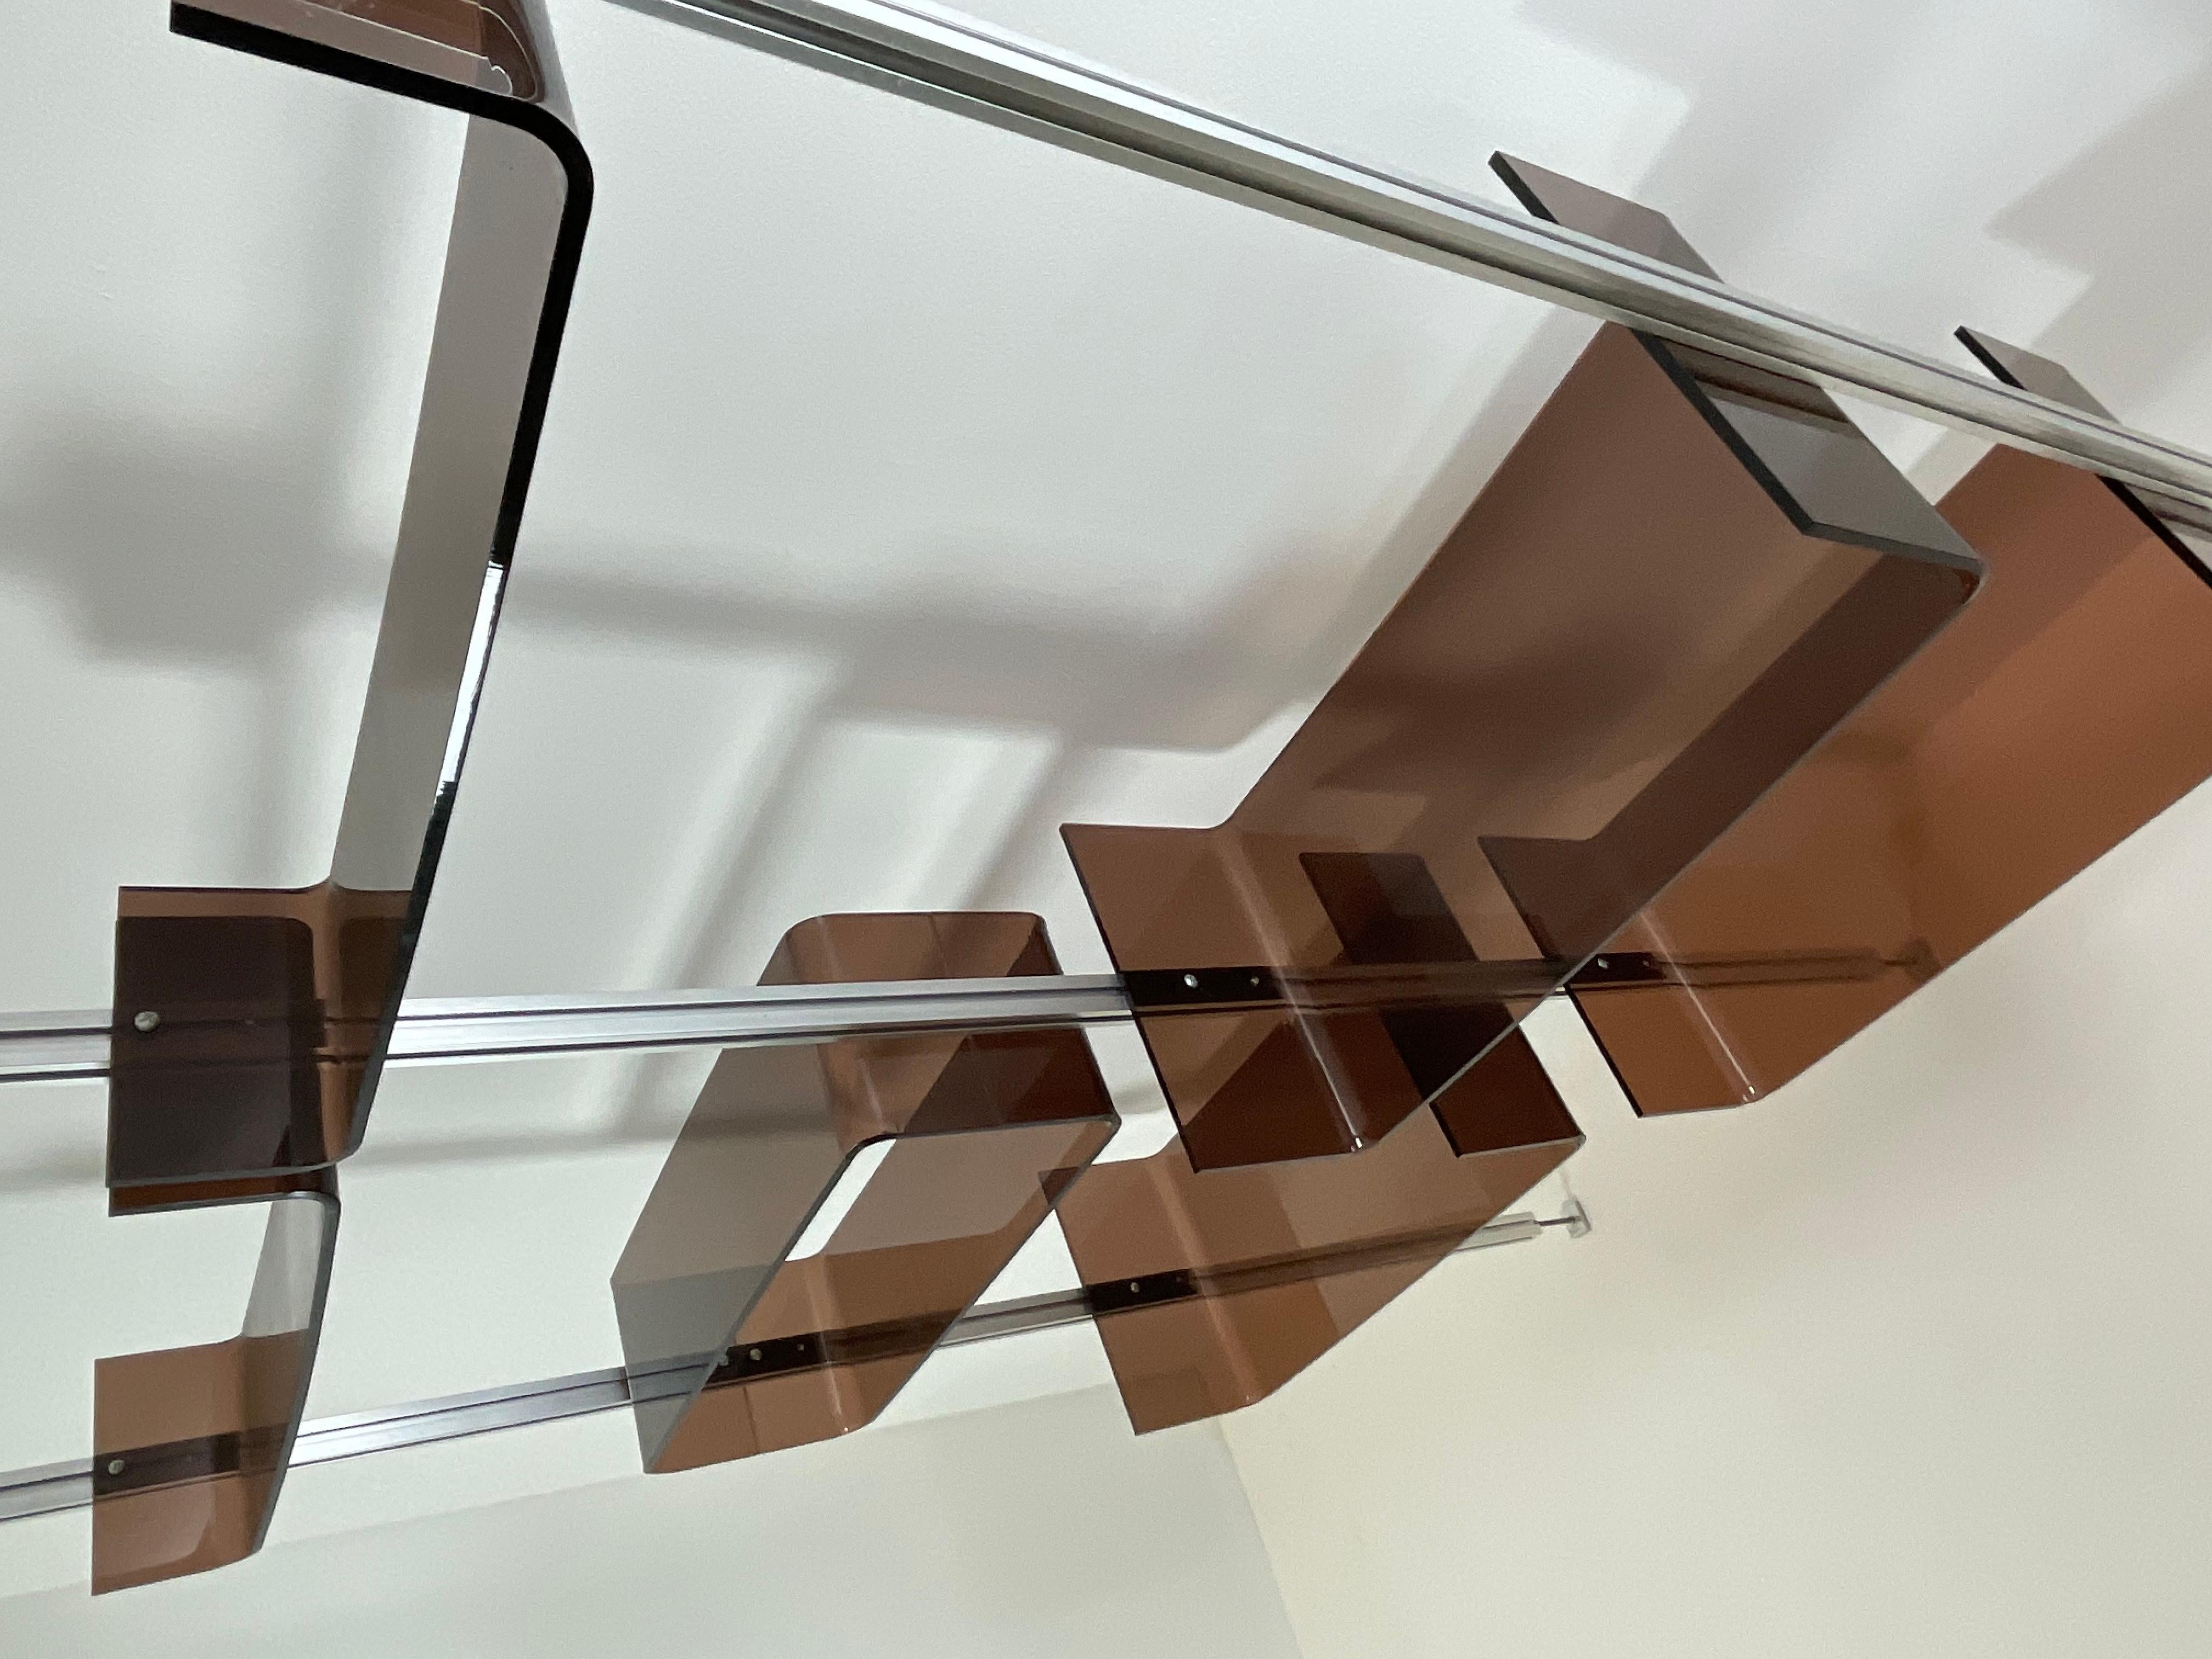 Modular shelf by Michel Ducaroy and produced by Roche Bobois in France around 1970. The vertical aluminum supports support quality brown Plexiglas shelves. It can also be used as a room divider. It can be extended in height to a maximum of 270 cm